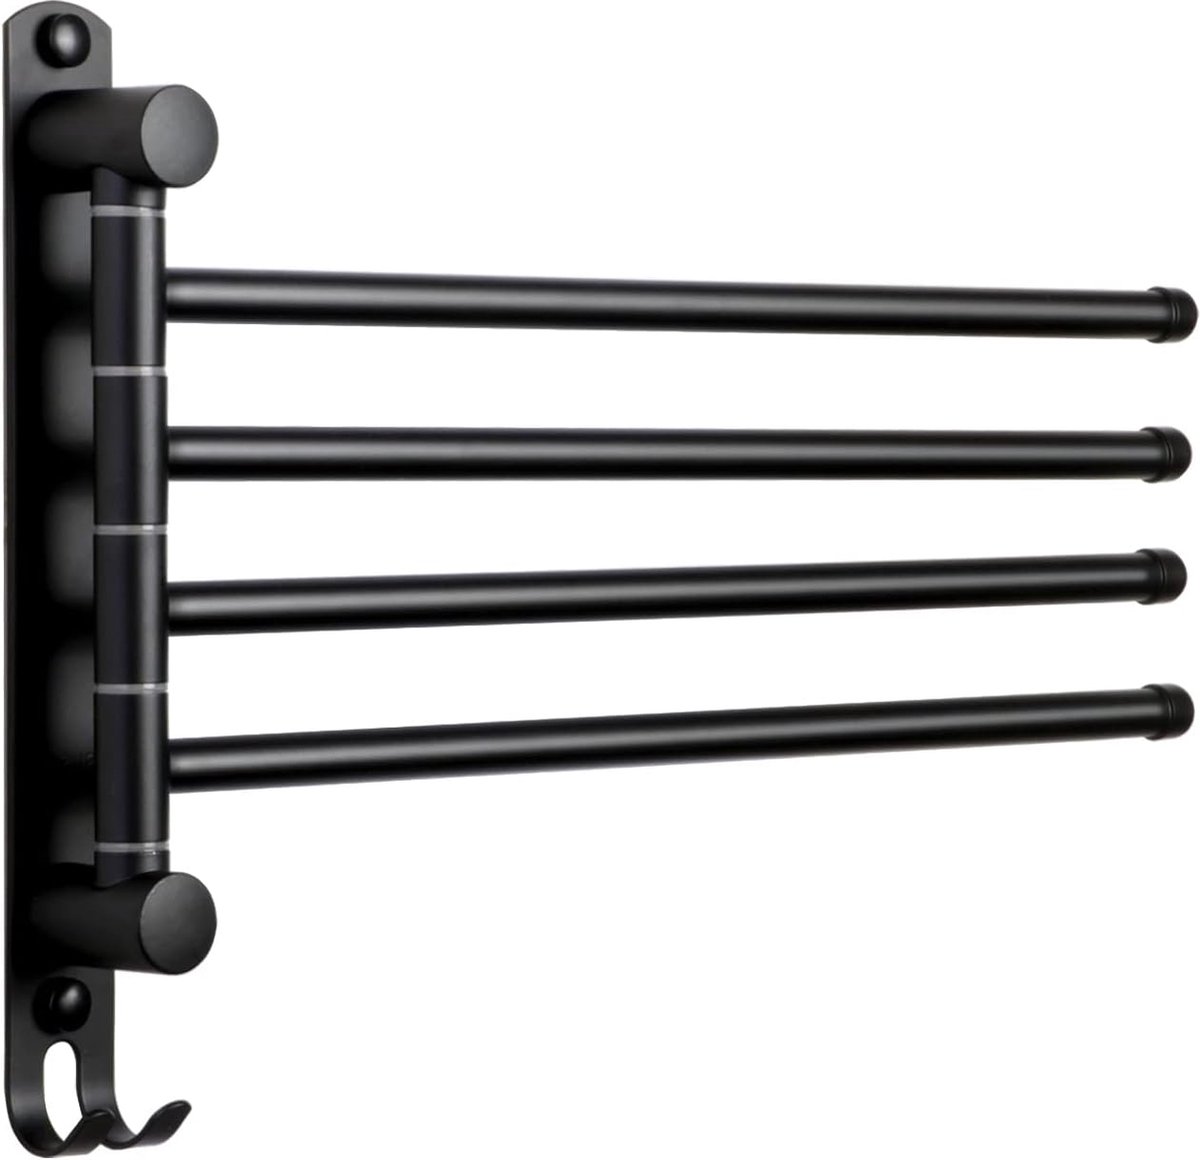 Stainless Steel Towel Rail Bathroom Swivelling 4 Arms Towel Rail Wall Mounted 32 cm Brushed Towel Rail for Kitchen, Toilet, Wardrobe and Bathroom, Black